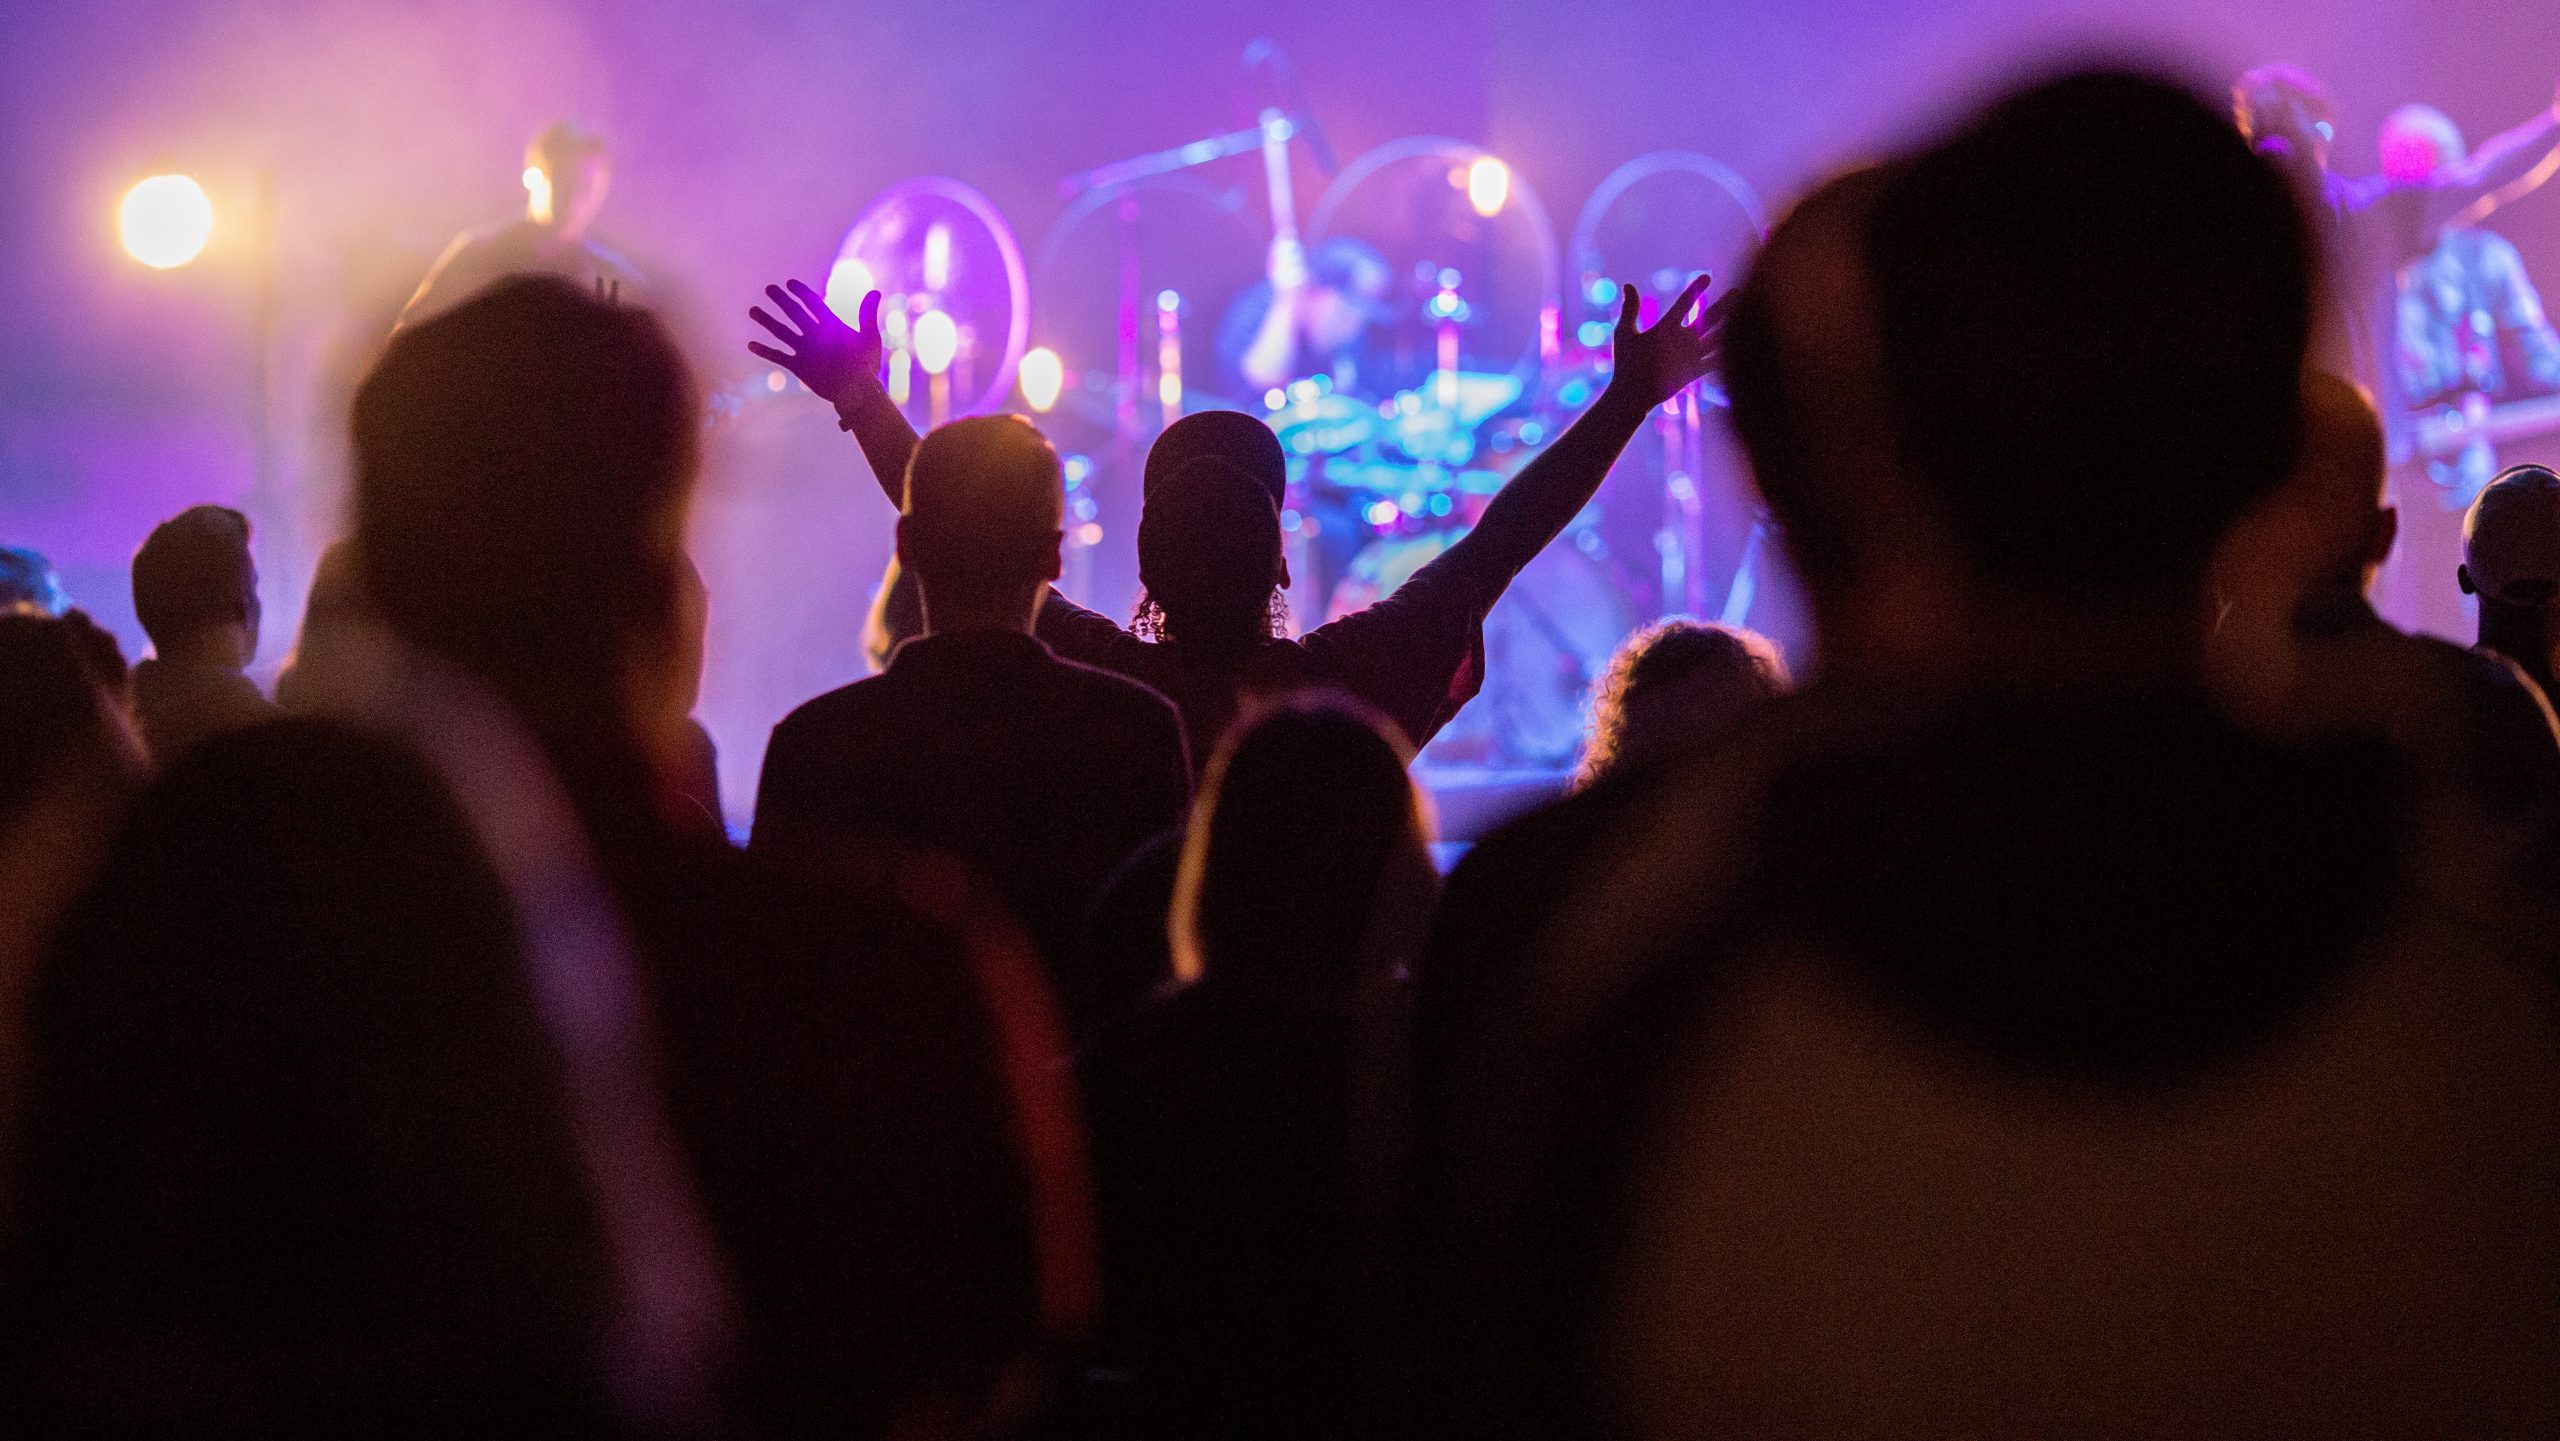 A group of people at a digital church concert with their hands raised on the church website.